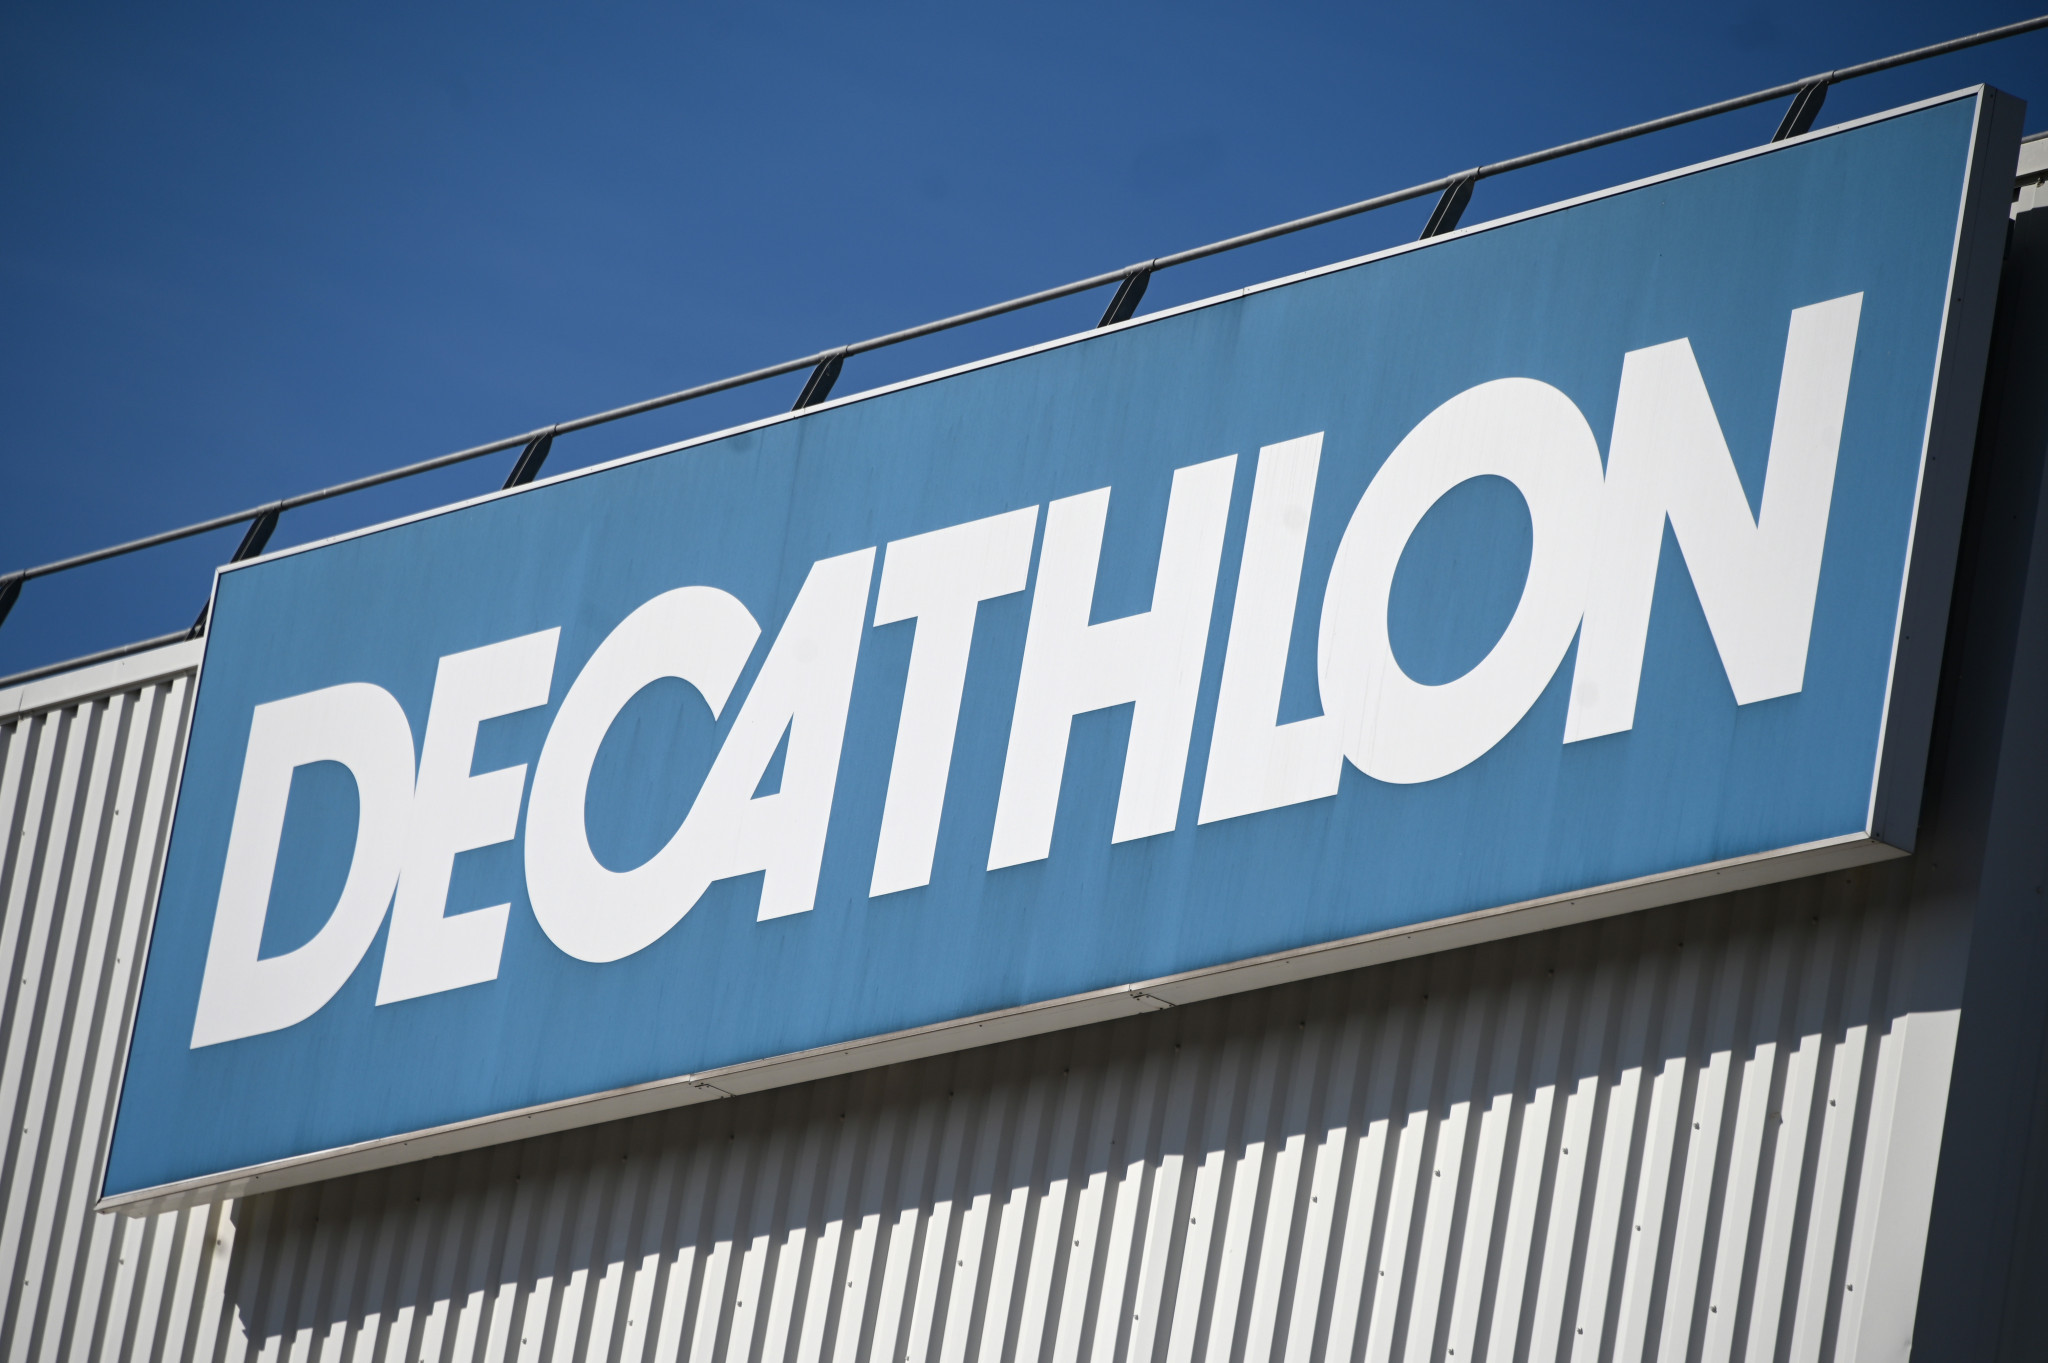 Decathlon has named 33 sporting figures to "Team Athletes" for Paris 2024 ©Getty Images